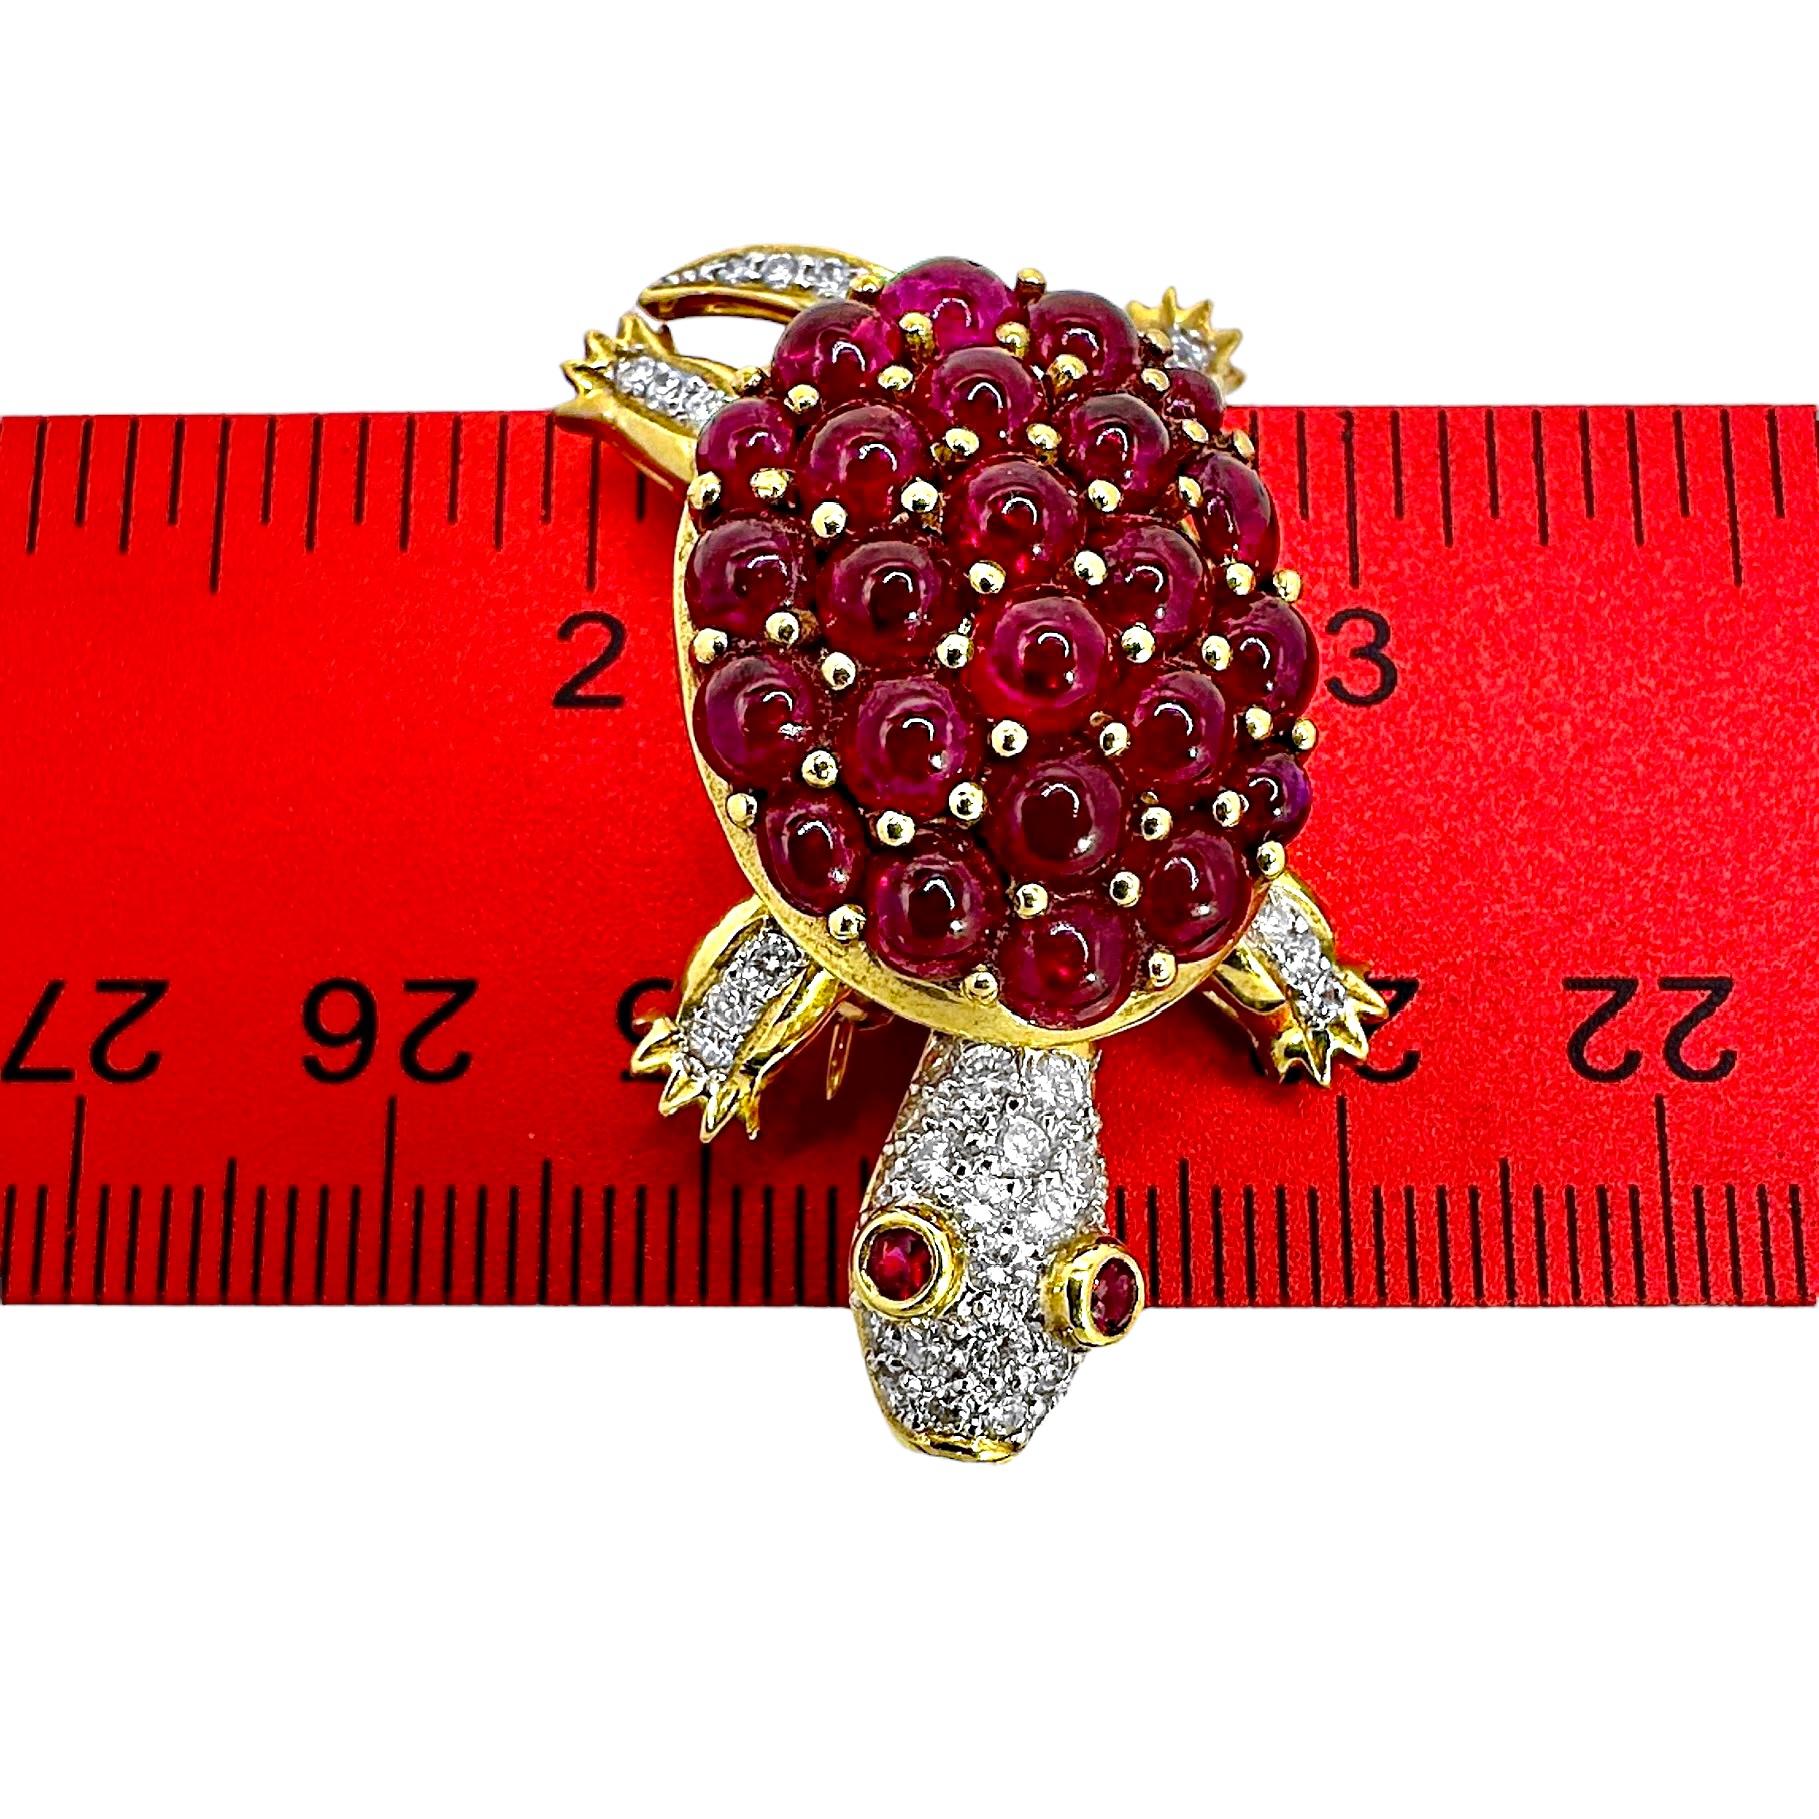 Adorable Turtle Brooch/Pendant with Motion in 18K Gold, Diamonds, and Rubies For Sale 12